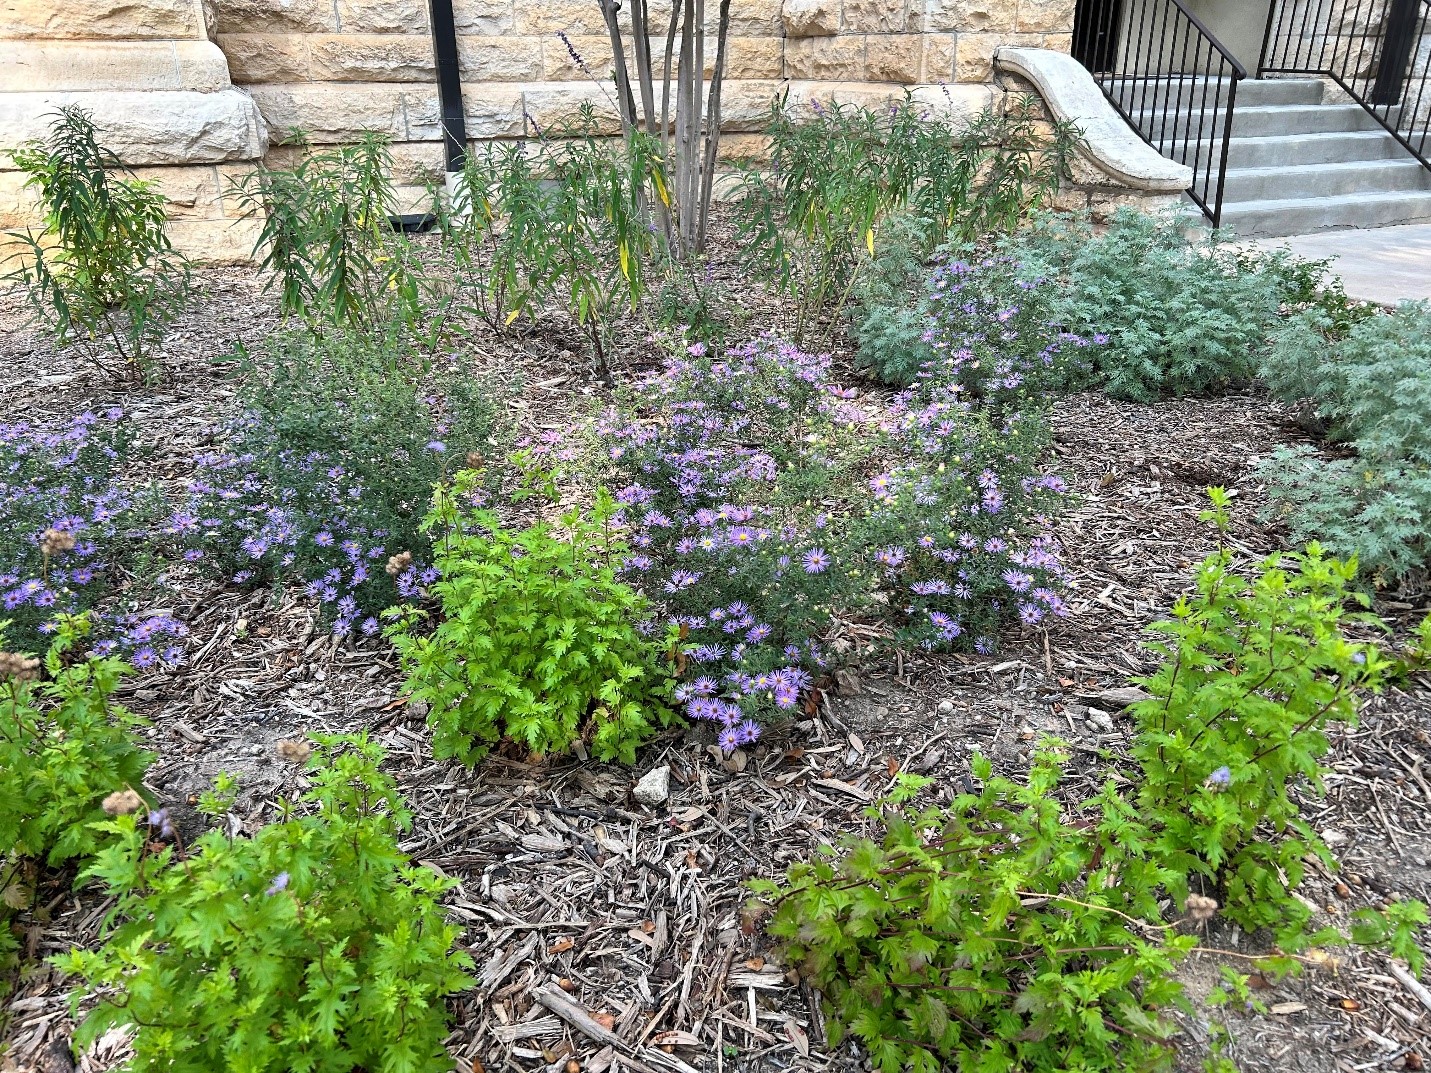 Groups of lime green and sage green shrubs, surrounded by mulch in front of a stone building. Purple asters bloom in the mid-ground..